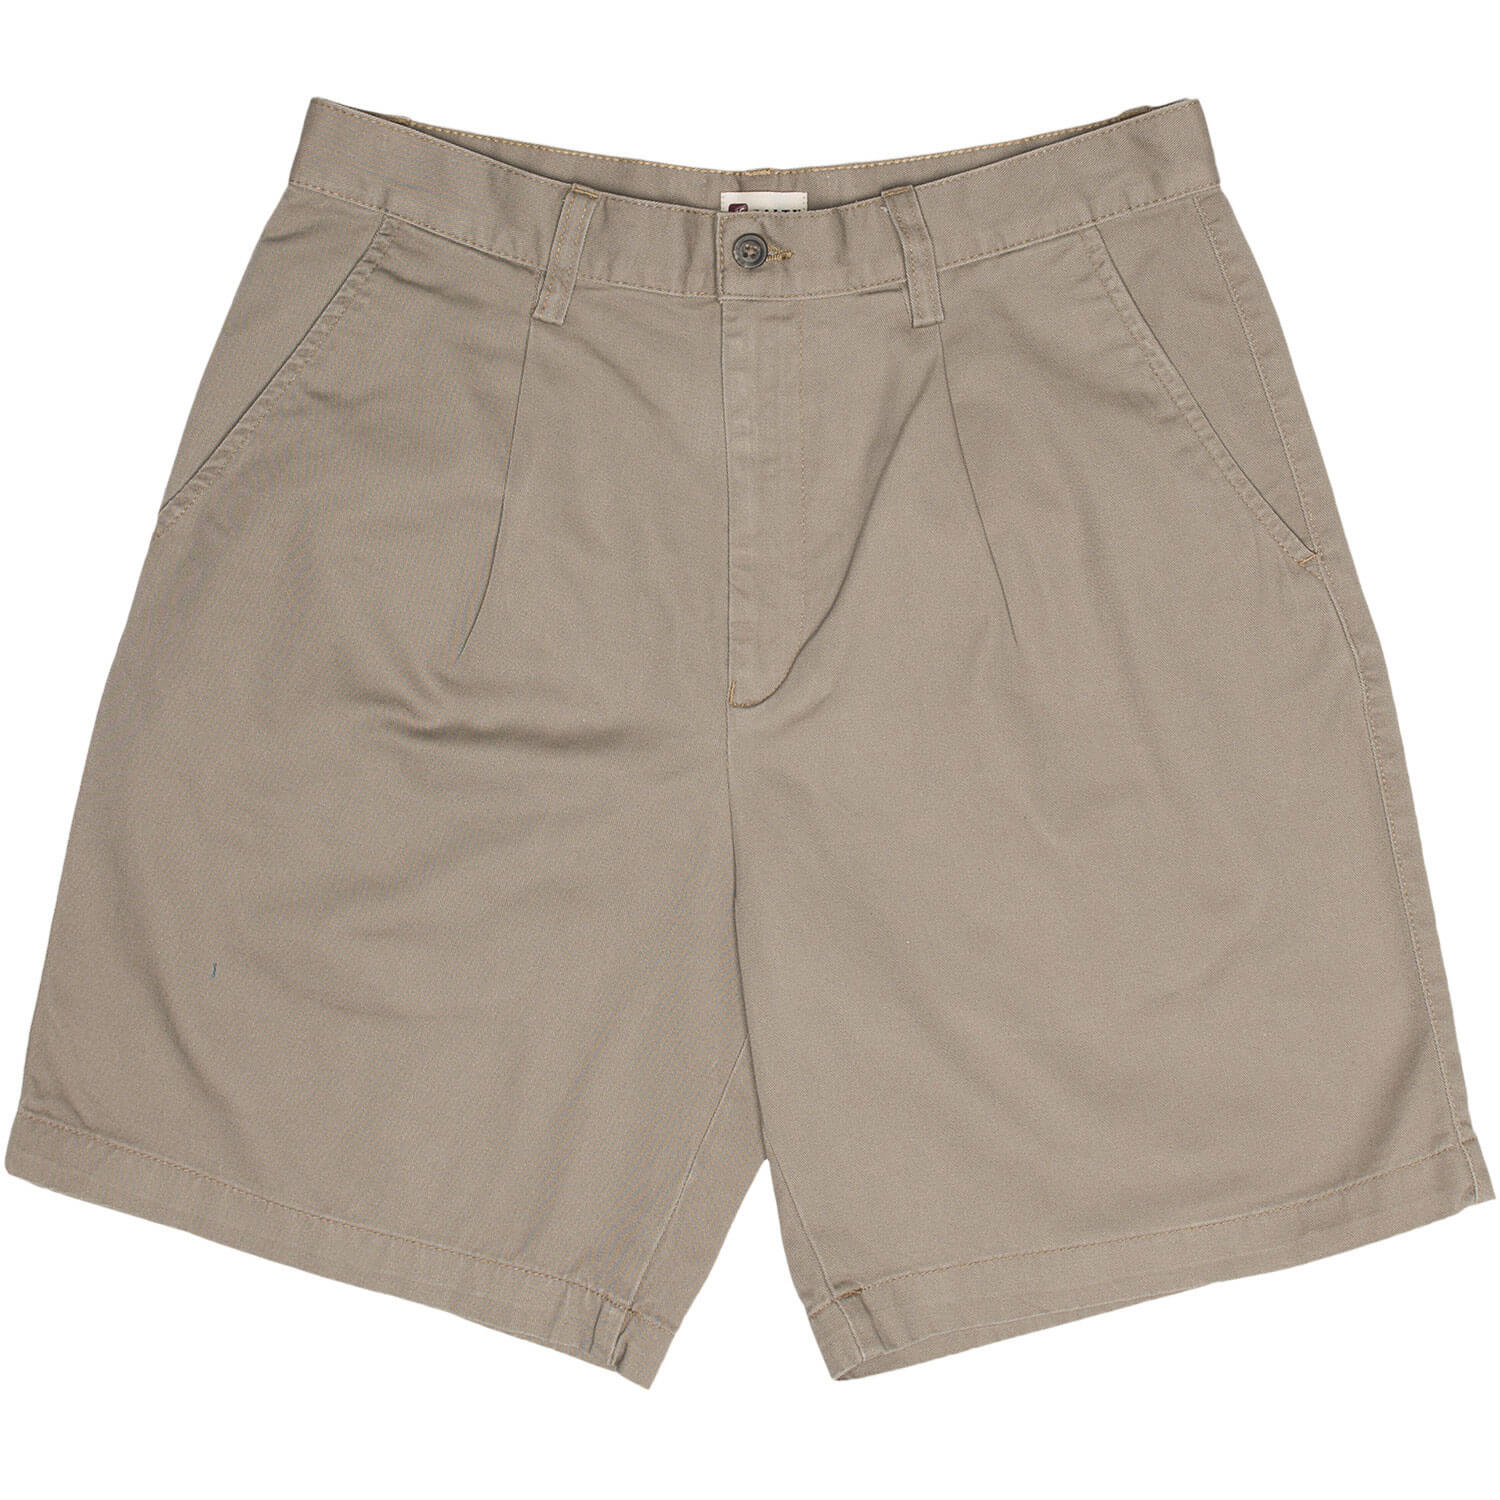 Salty Ridge Trail Shorts: Stylish And Durable Outdoor Bottoms For ...